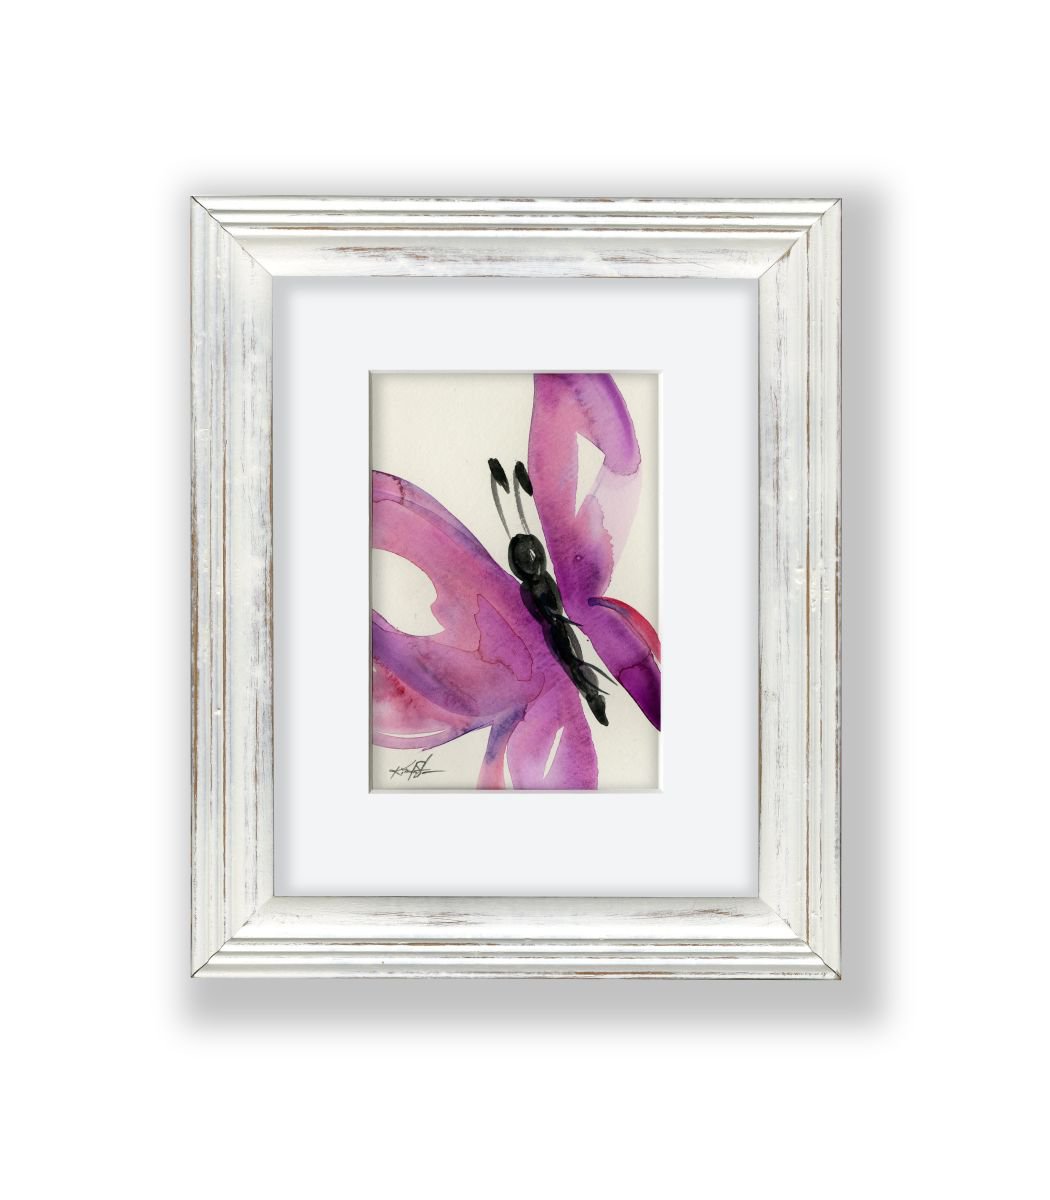 Butterfly Joy 13 - Framed Butterfly Painting by Kathy Morton Stanion by Kathy Morton Stanion